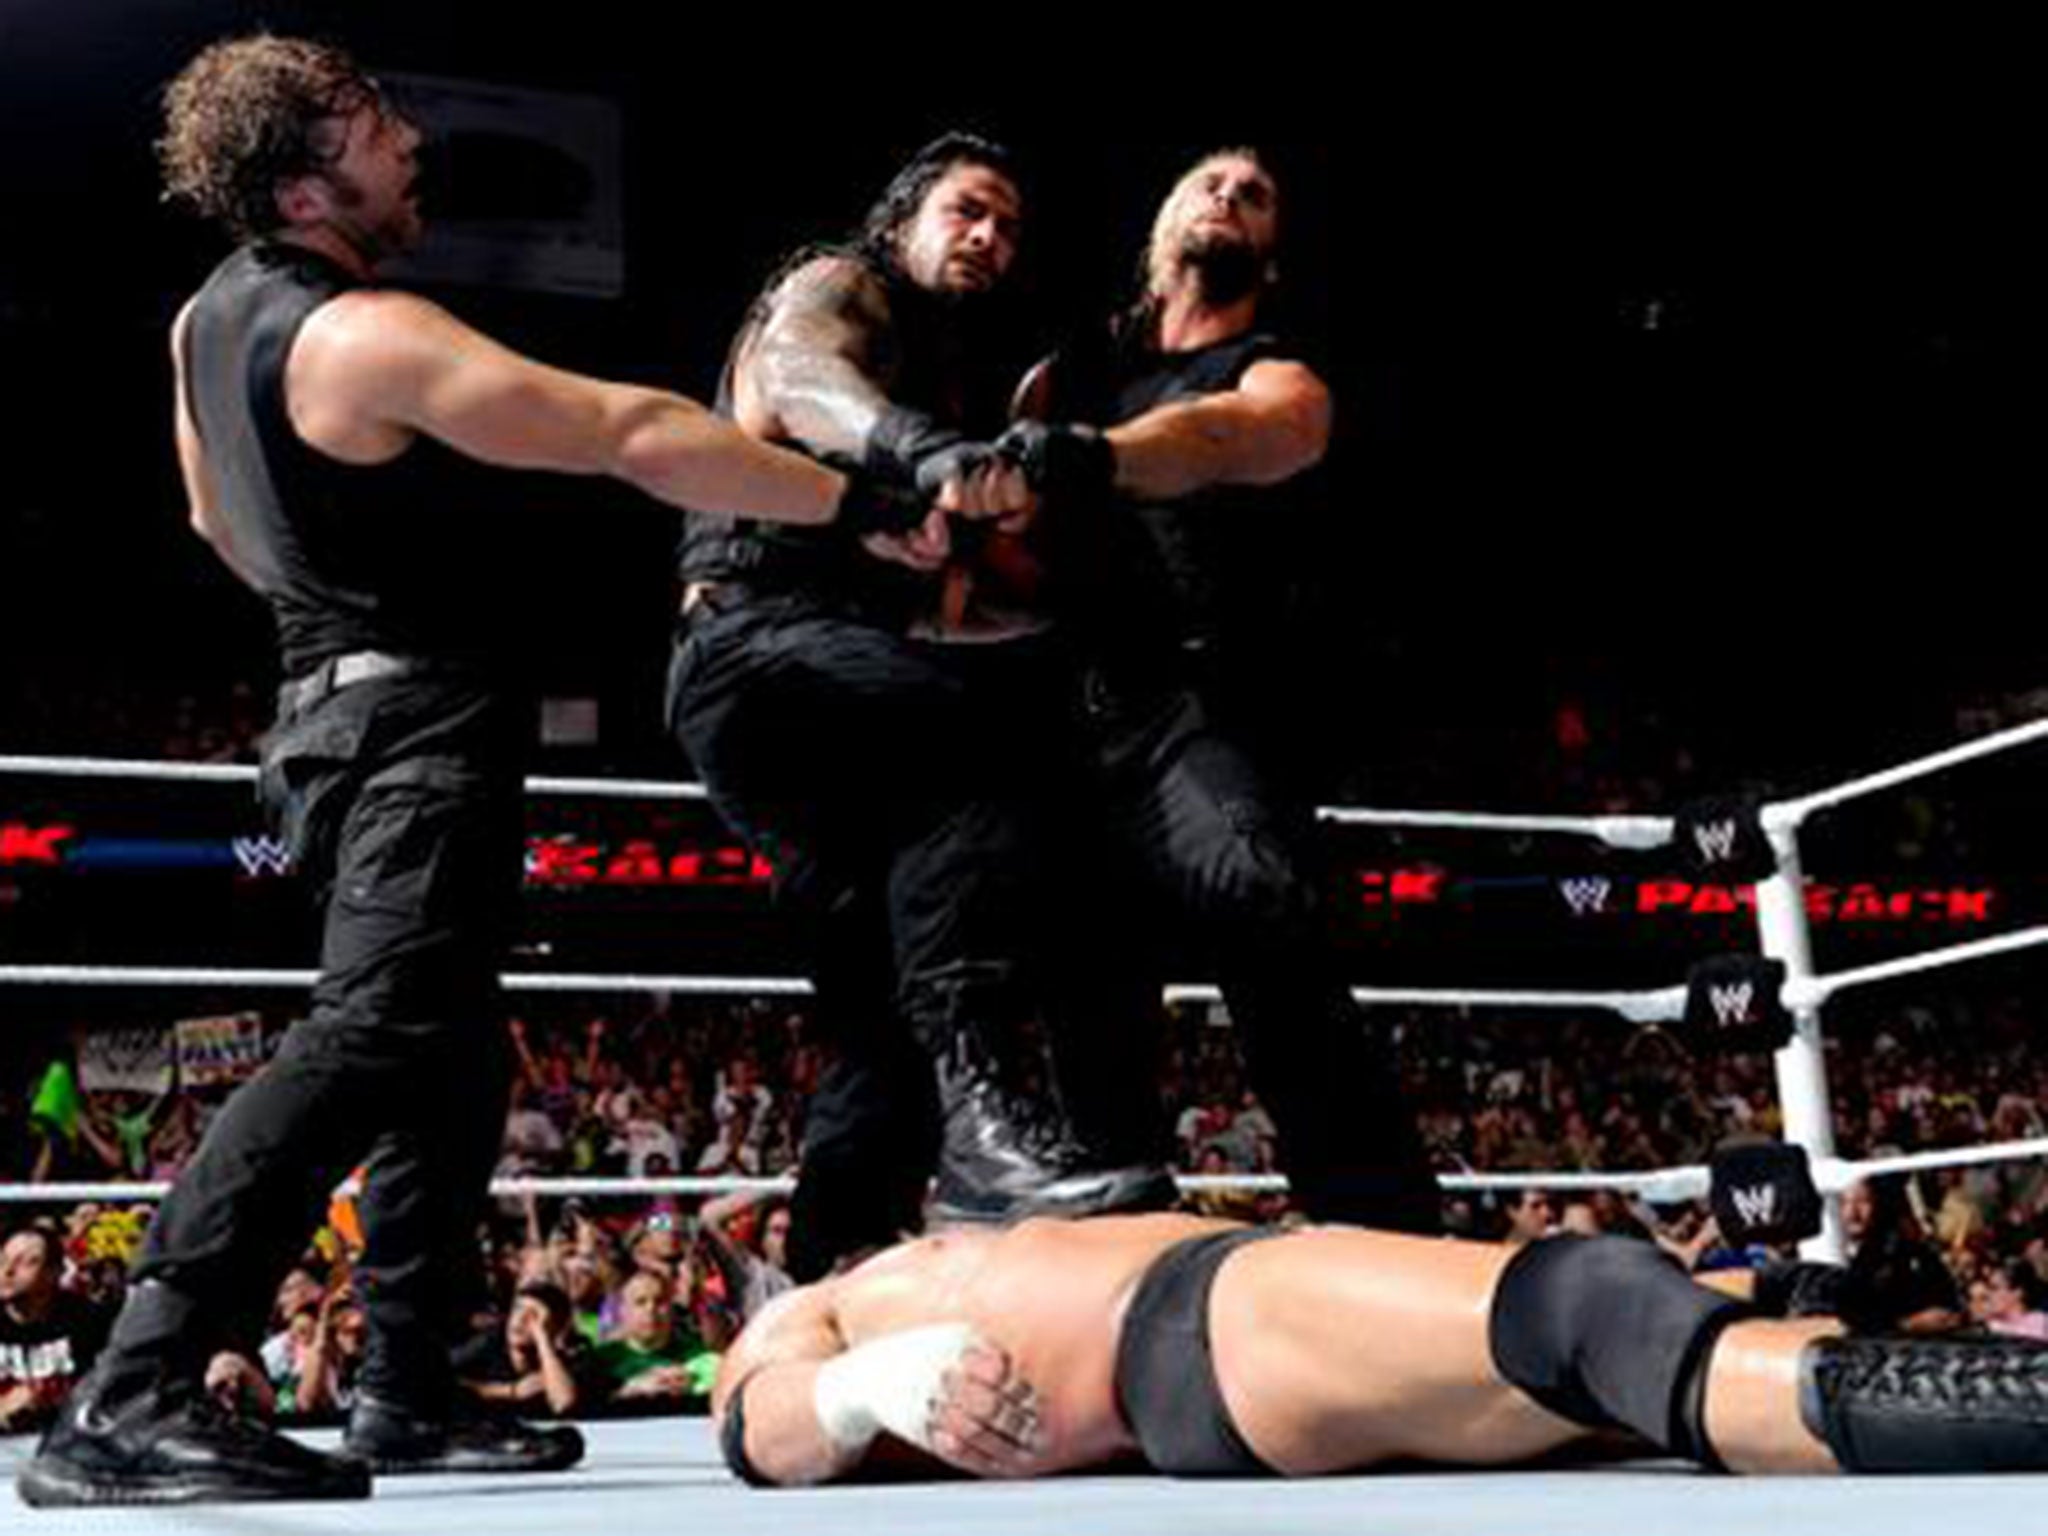 The Shield celebrate their victory over Evolution at Payback